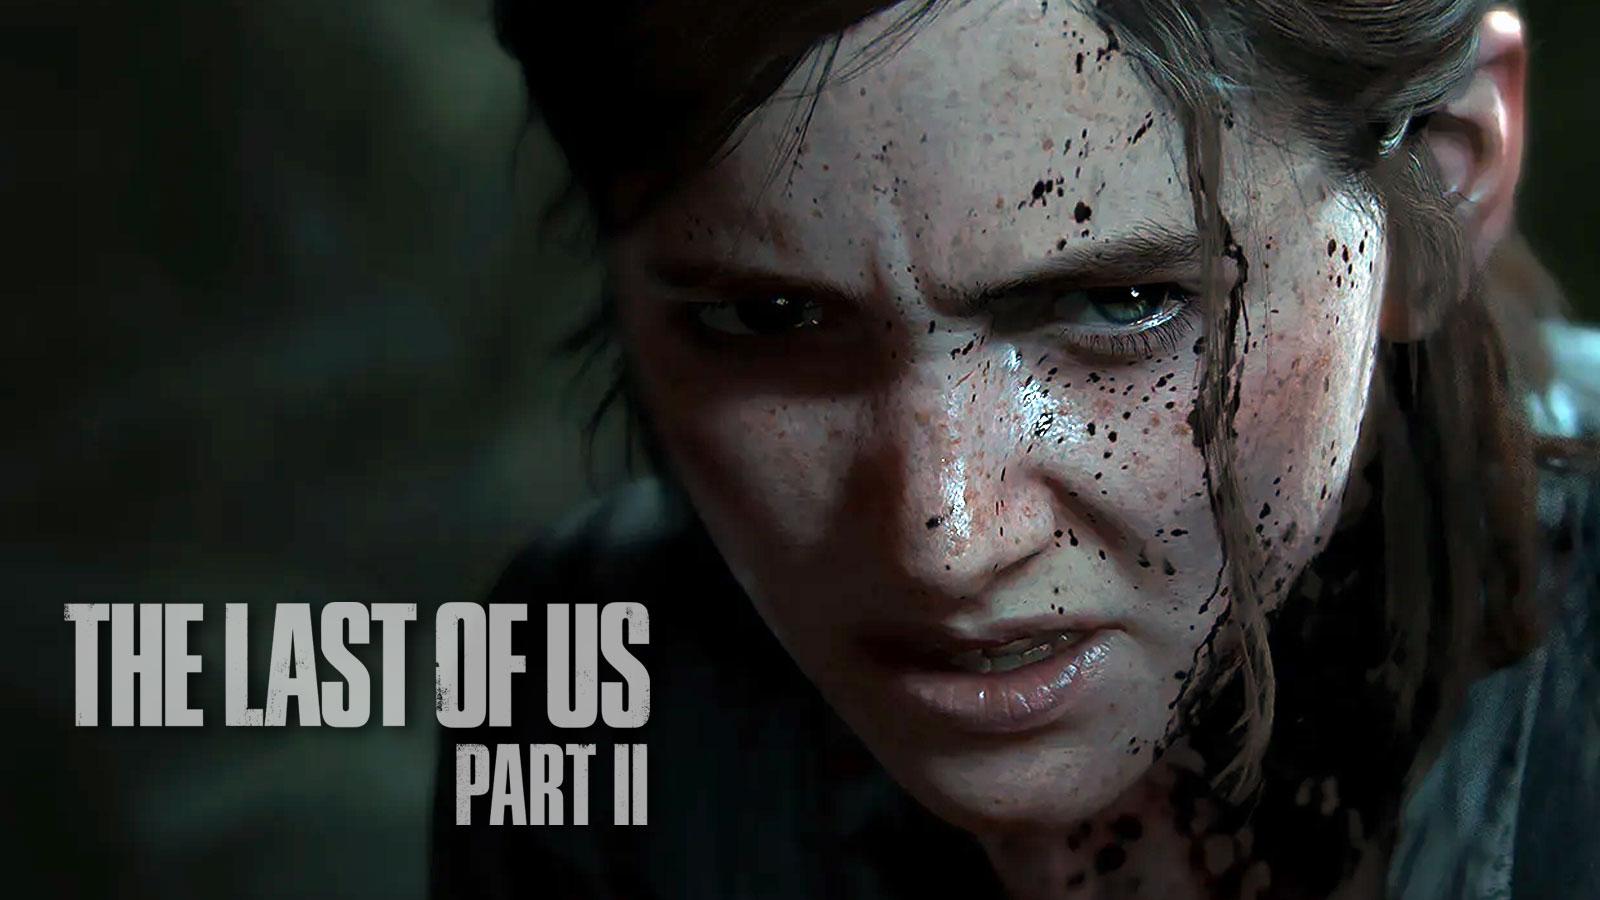 The Last of Us 2: PS4 game to launch in June following online leaks